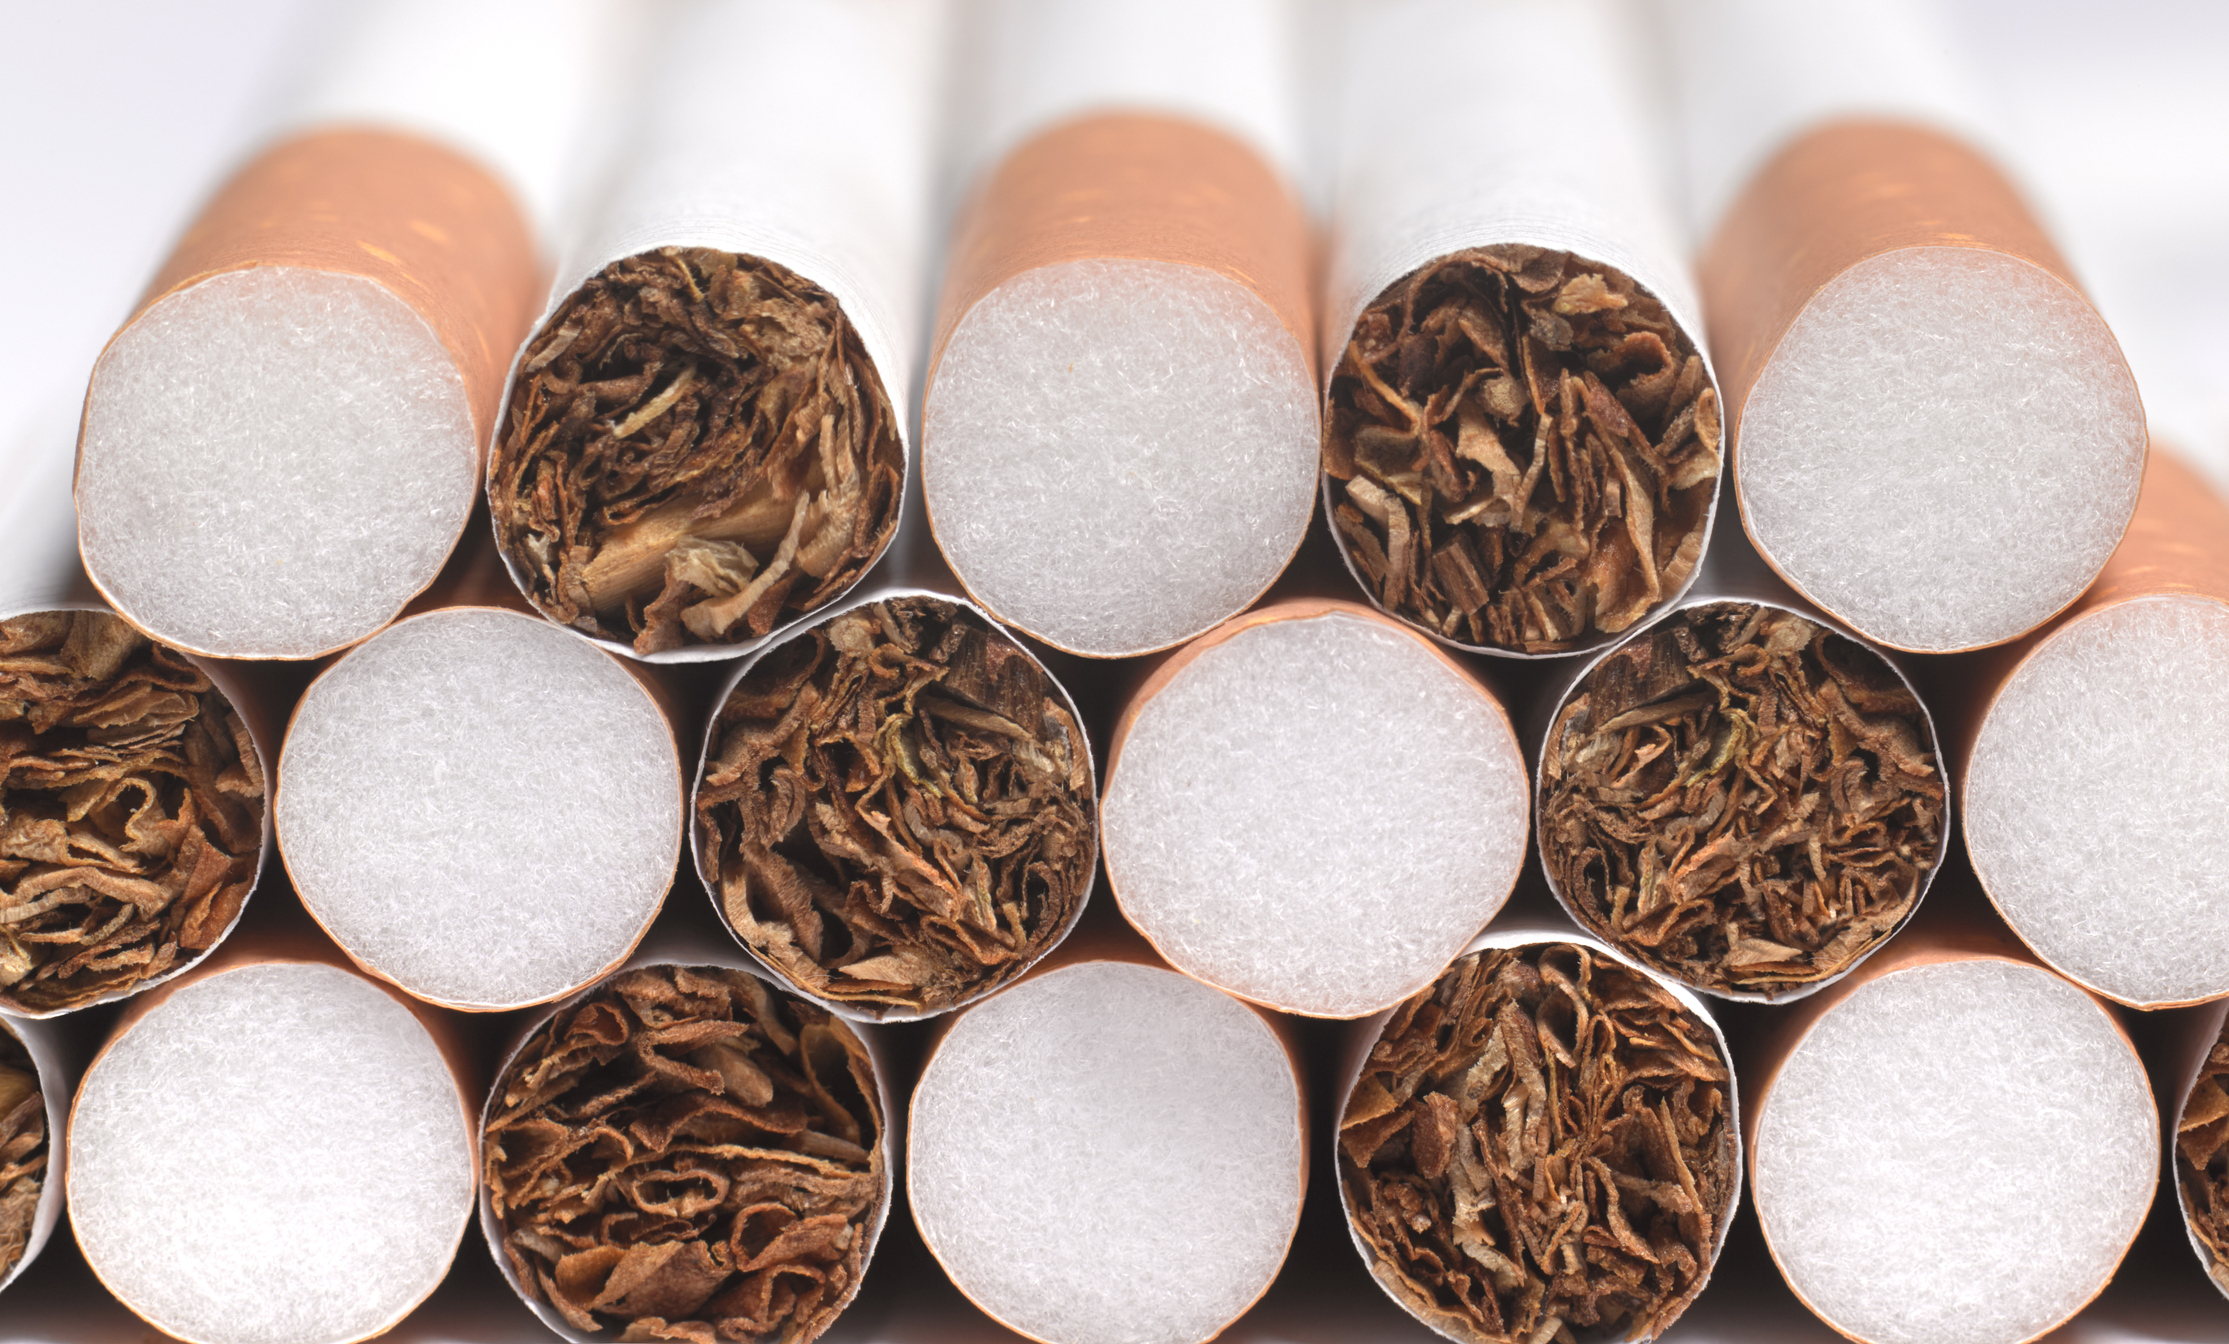 Cigarette Smoking in U.S. Drops to Lowest Level Since 1965